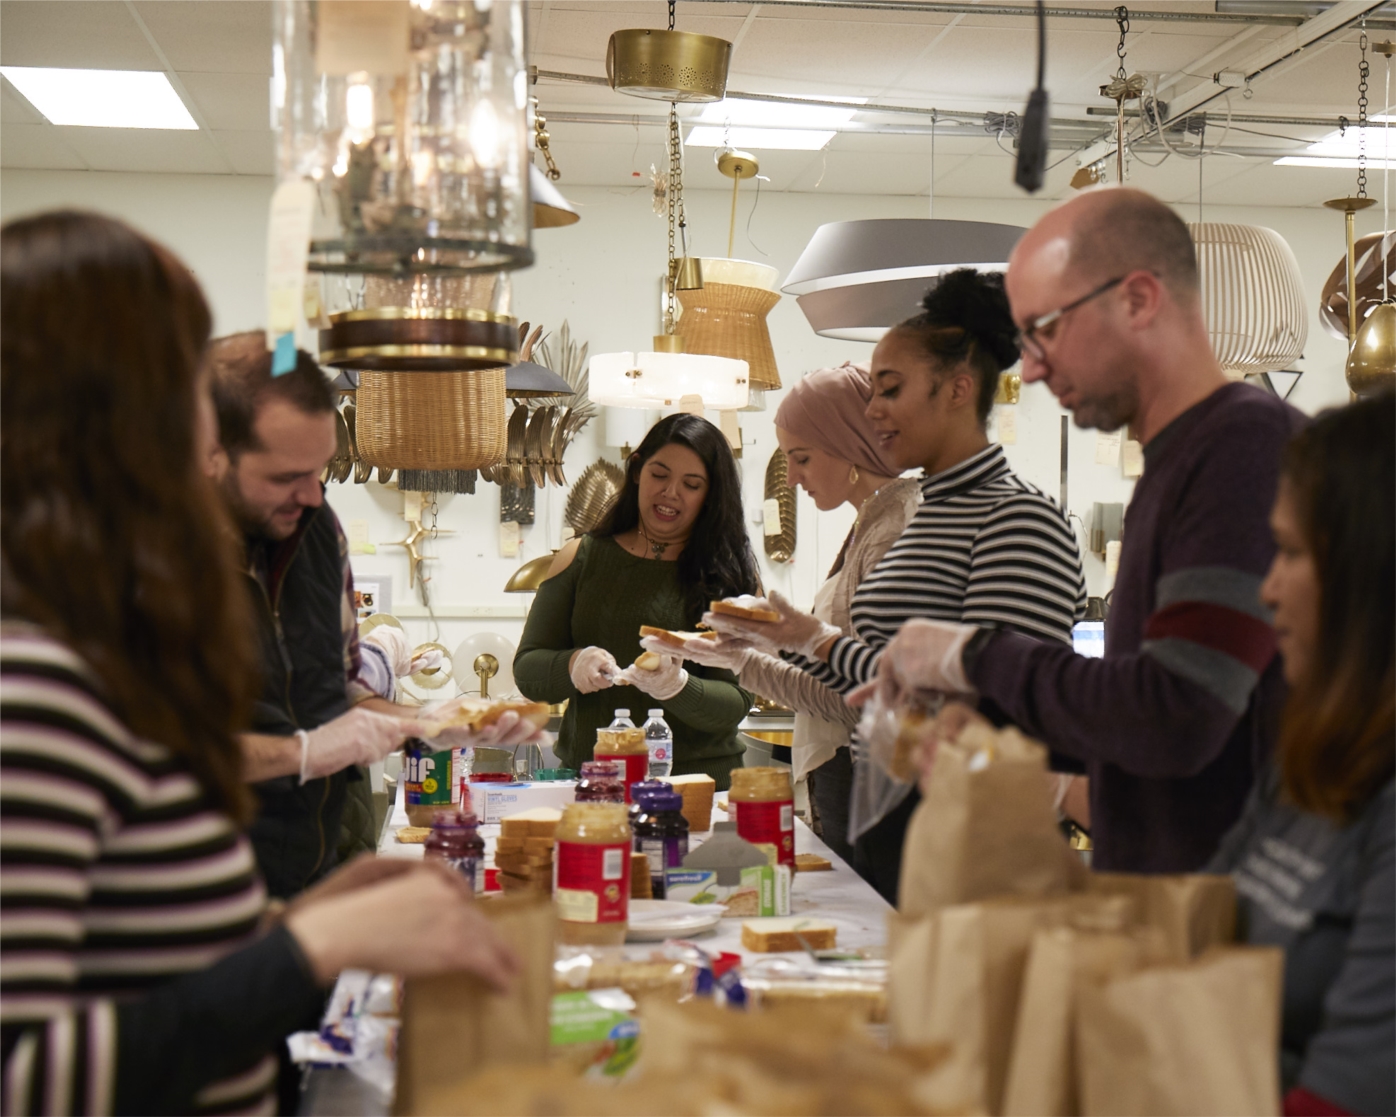 Arteriors operates from an entrepreneurial spirit where embracing and driving change is something our employees consistently aim for.  In the spirit of this, Arteriors hosted a Giving Day to promote philanthropic efforts to support multiple local non-profit organizations.  These are some of our employees putting together sandwiches to provide to individuals who are in need.